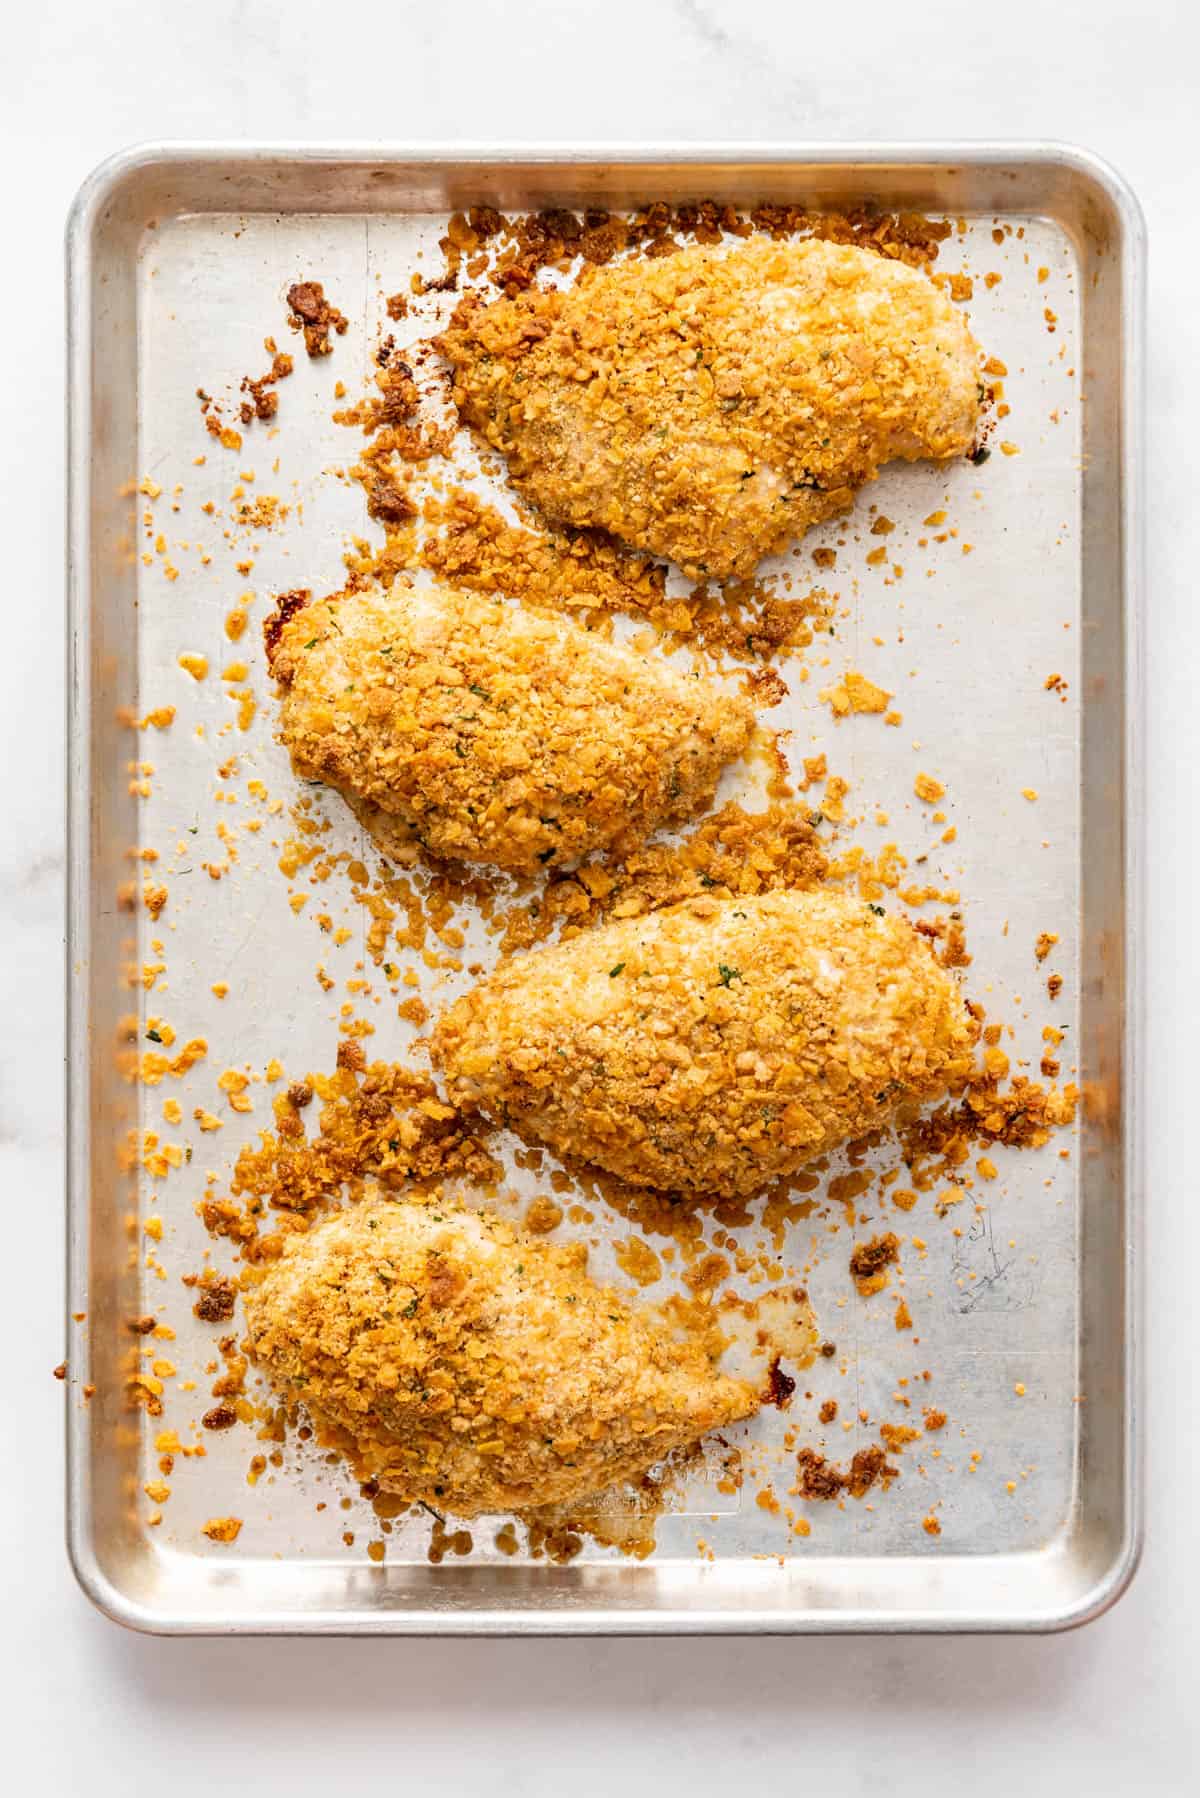 Four baked ranch chicken breasts on a baking sheet.